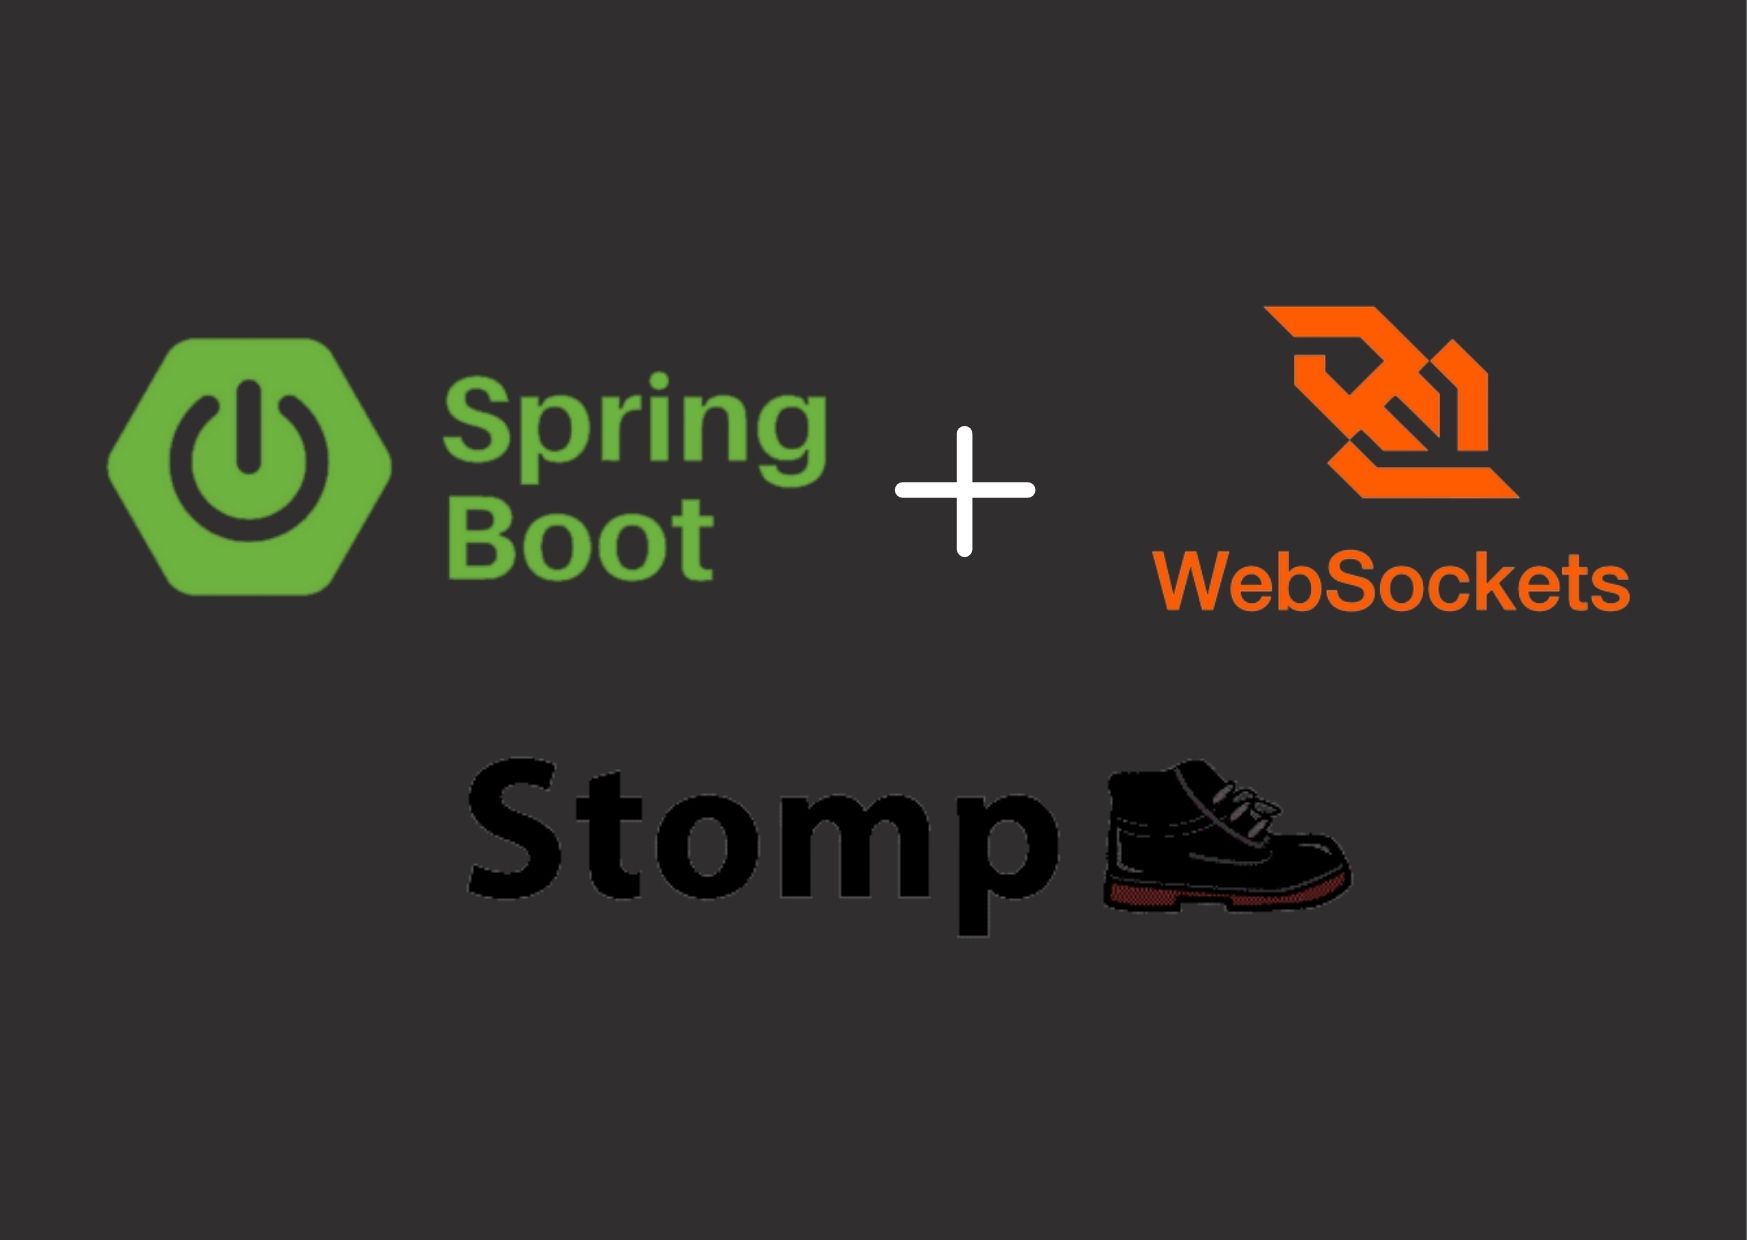 How to Send Push Notification With Spring Boot using Websockets and STOMP